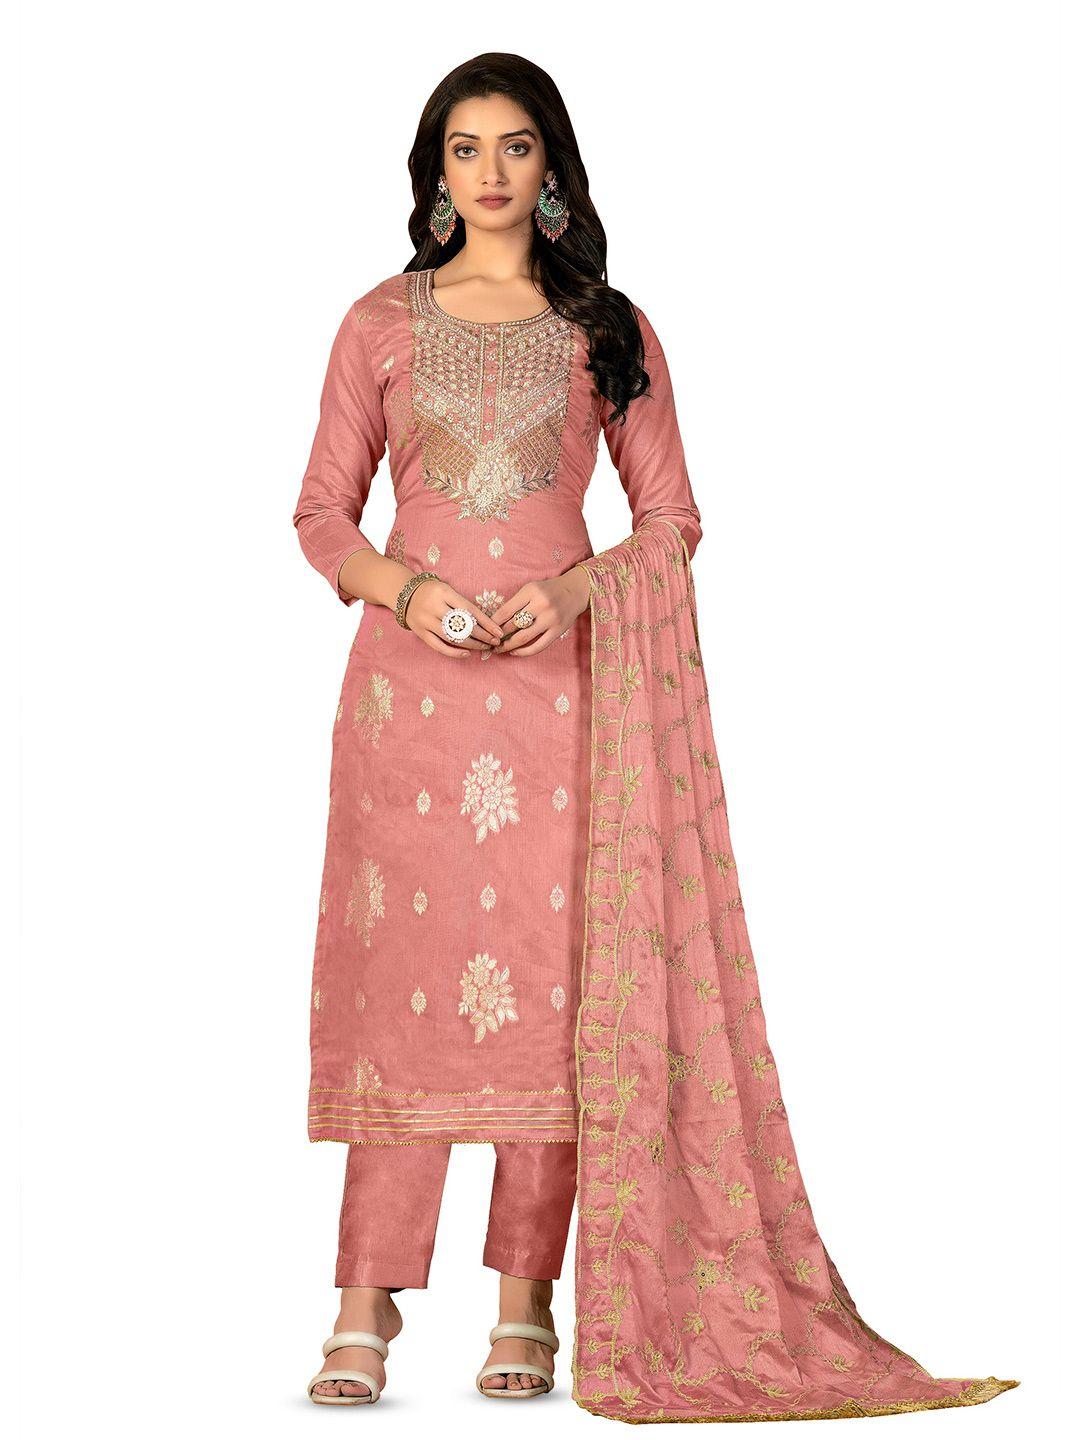 MANVAA Embroidered Unstitched Dress Material